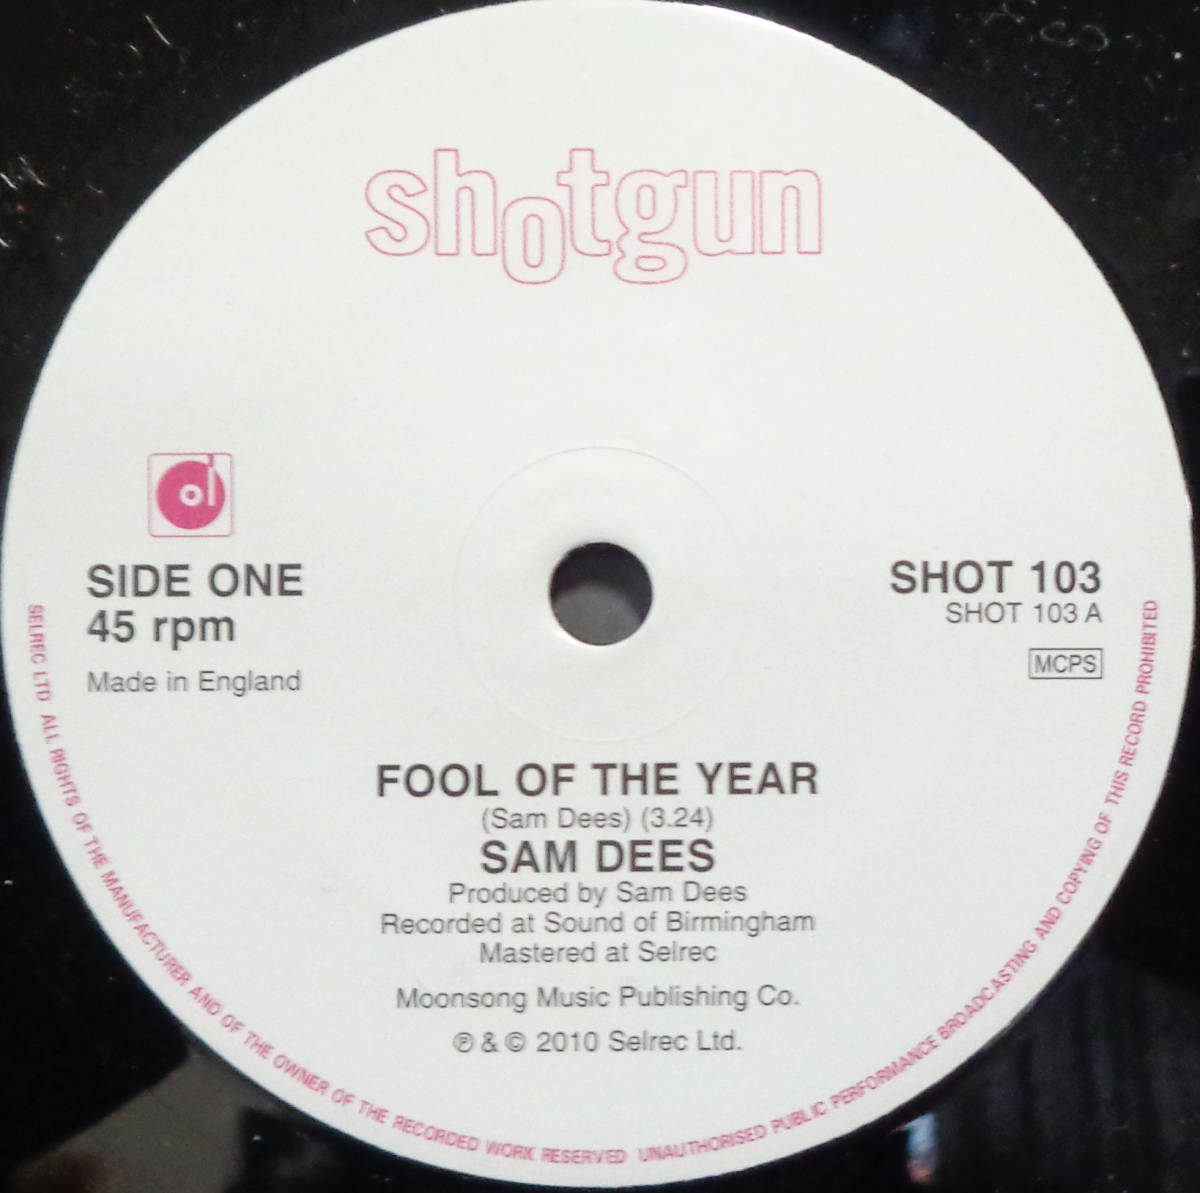 【SOUL 45】SAM DEES - FOOL OF THE YEAR / TRAIN TO TAMPA (s231006022)_画像1